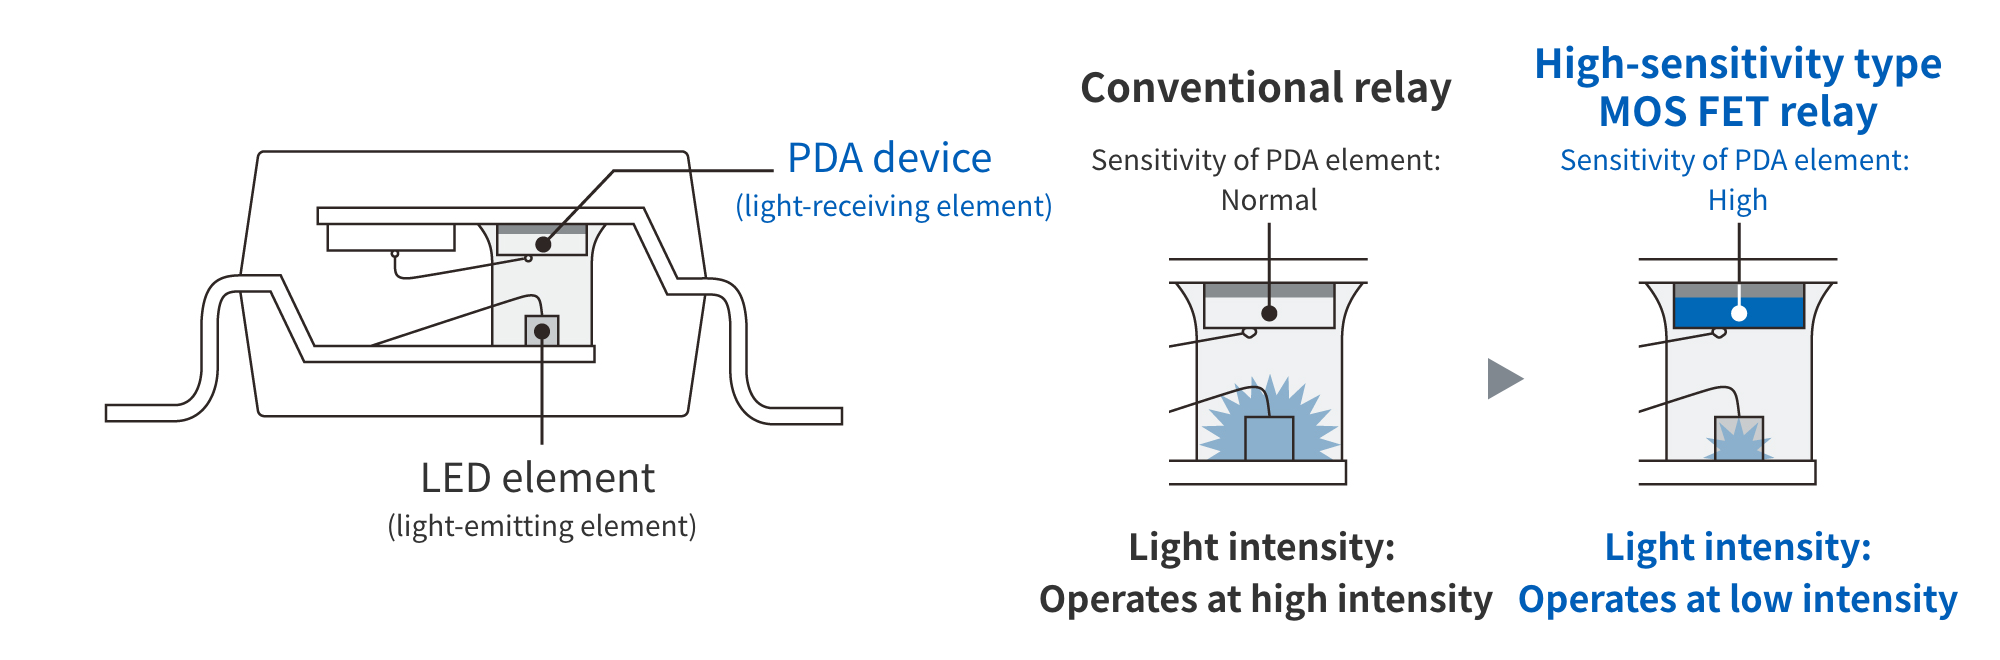 Conventional relay: Sensitivity of PDA element: Normal, Light intensity: Operates at high intensity　High-sensitivity type MOS FET relay: Sensitivity of PDA element: High, Light intensity: Operates at lower intensity